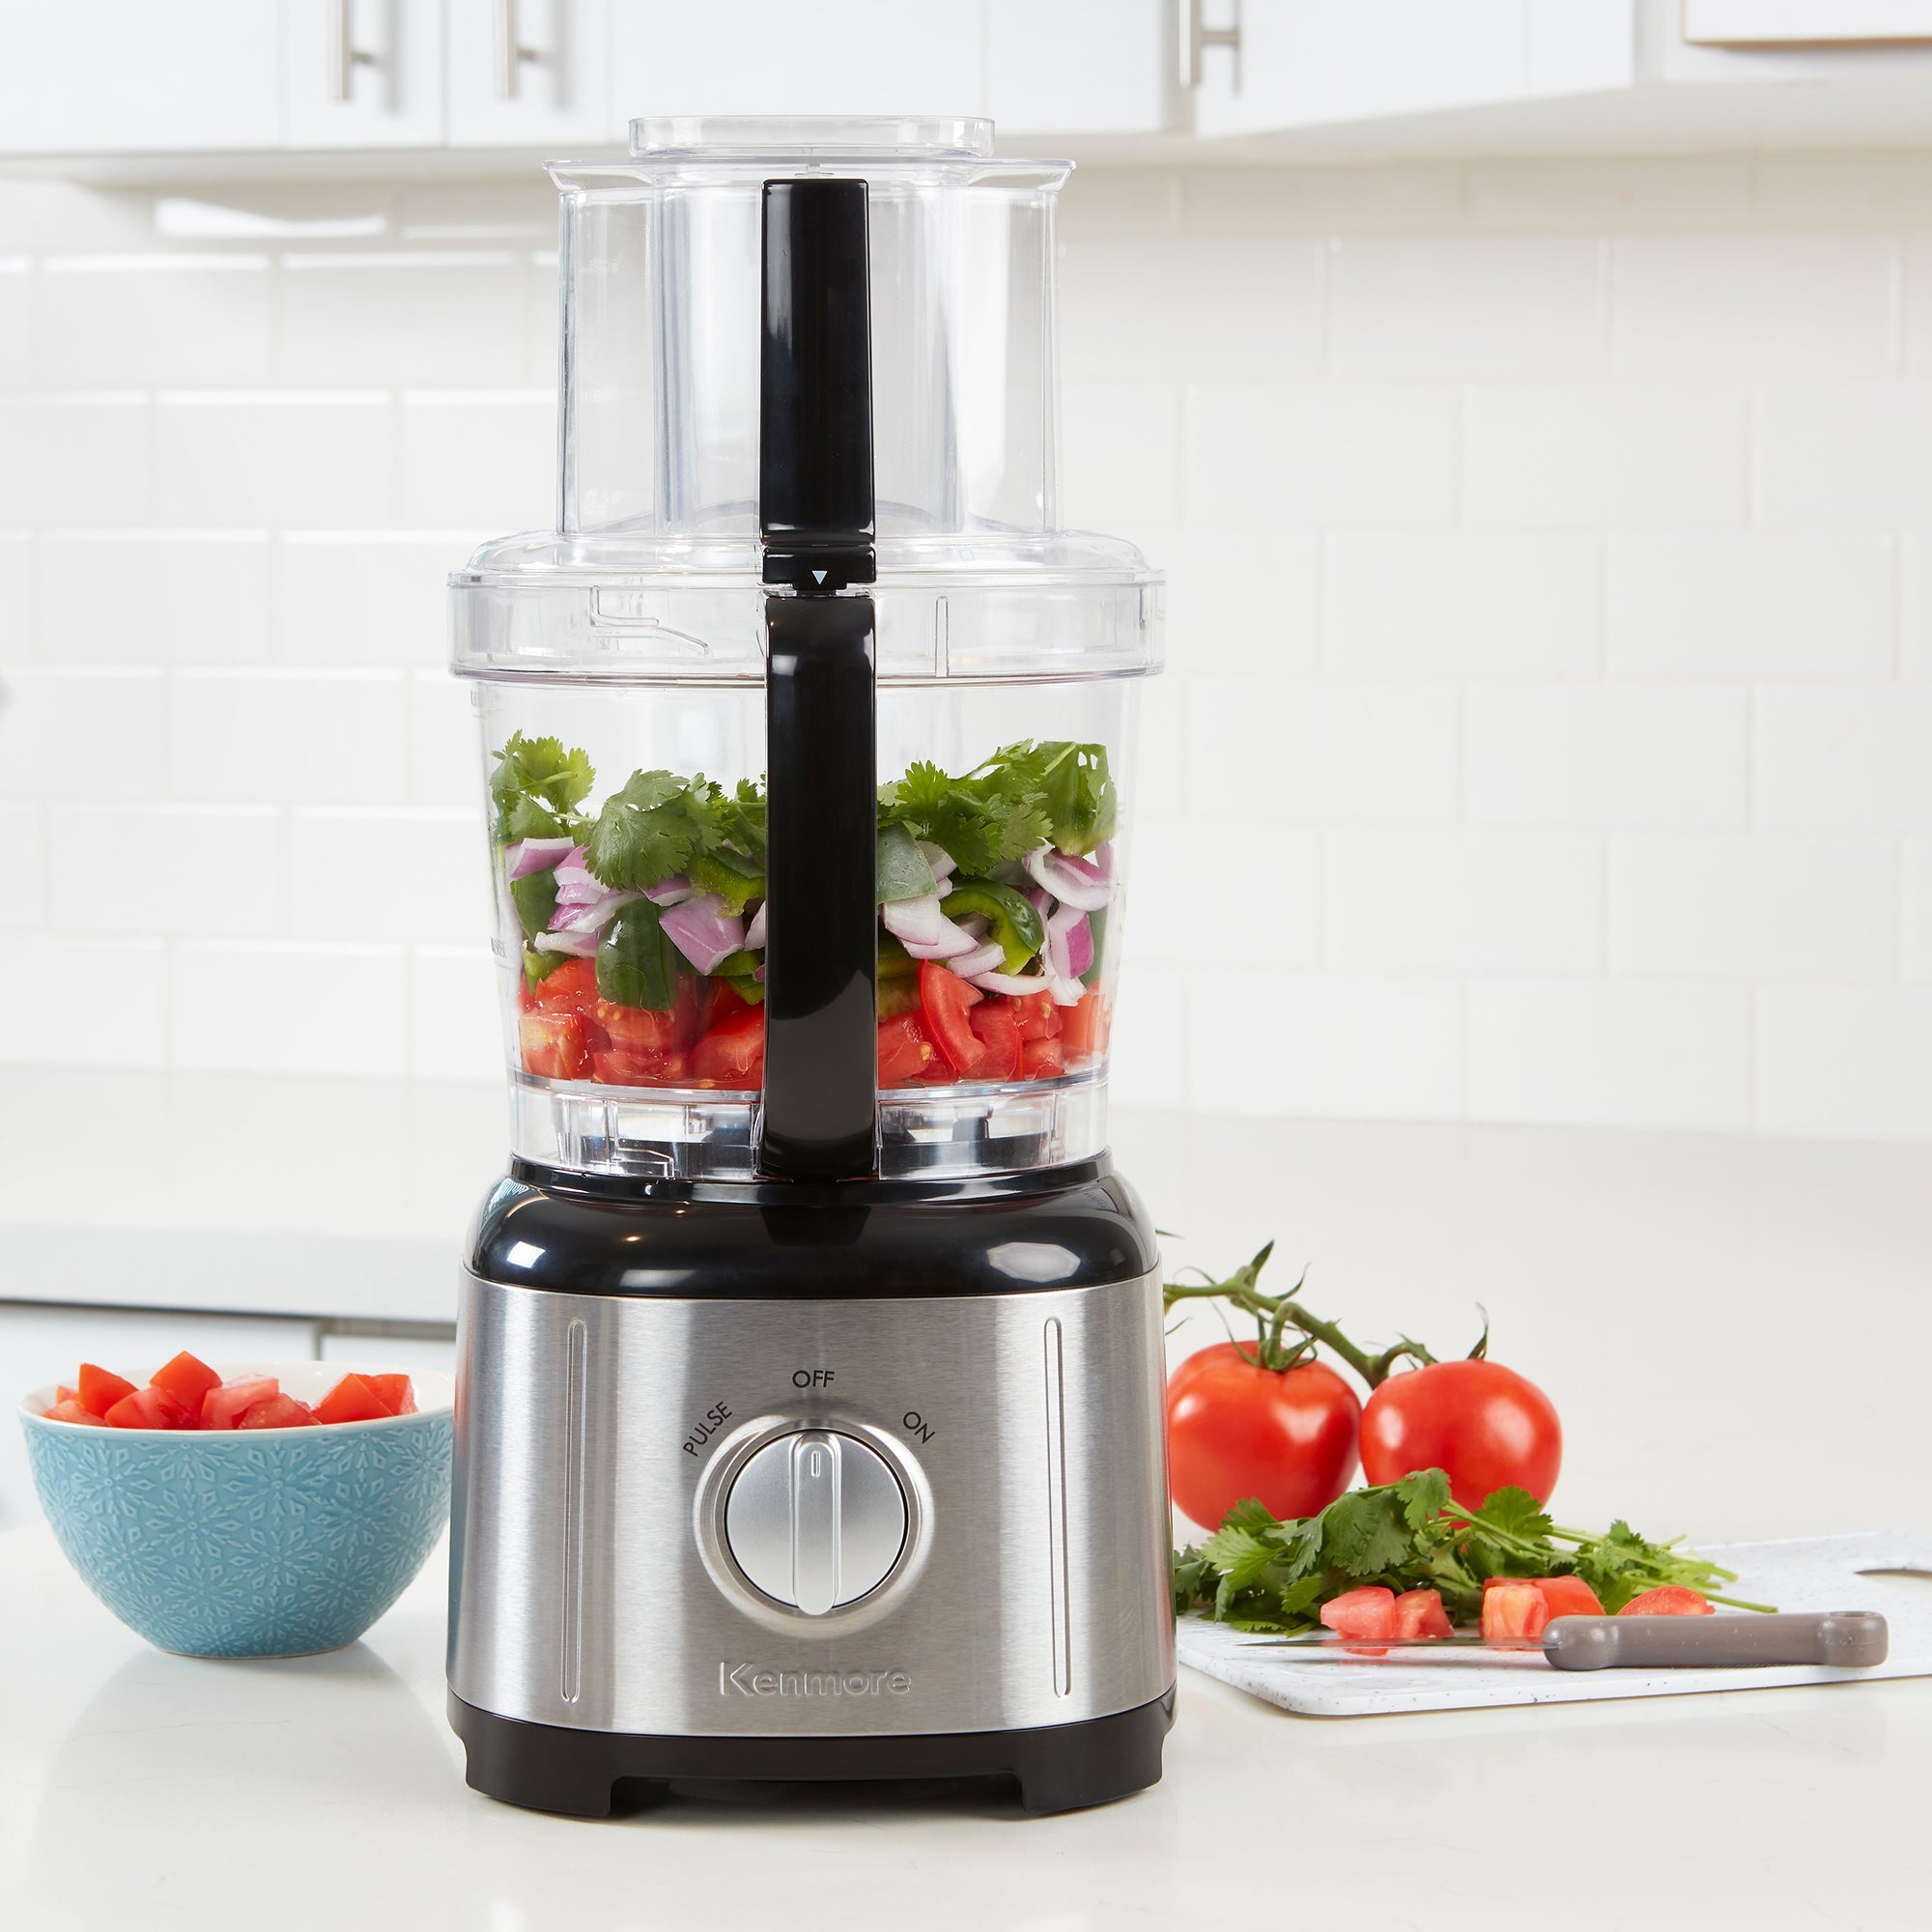 Kenmore 11 cup food processor and vegetable chopper on a light gray countertop with white tile backsplash behind. There are chopped tomatoes, red onions, and cilantro in the food processor, a bowl of chopped tomatoes to the left and a cutting board, knife, and whole and chopped ingredients to the right